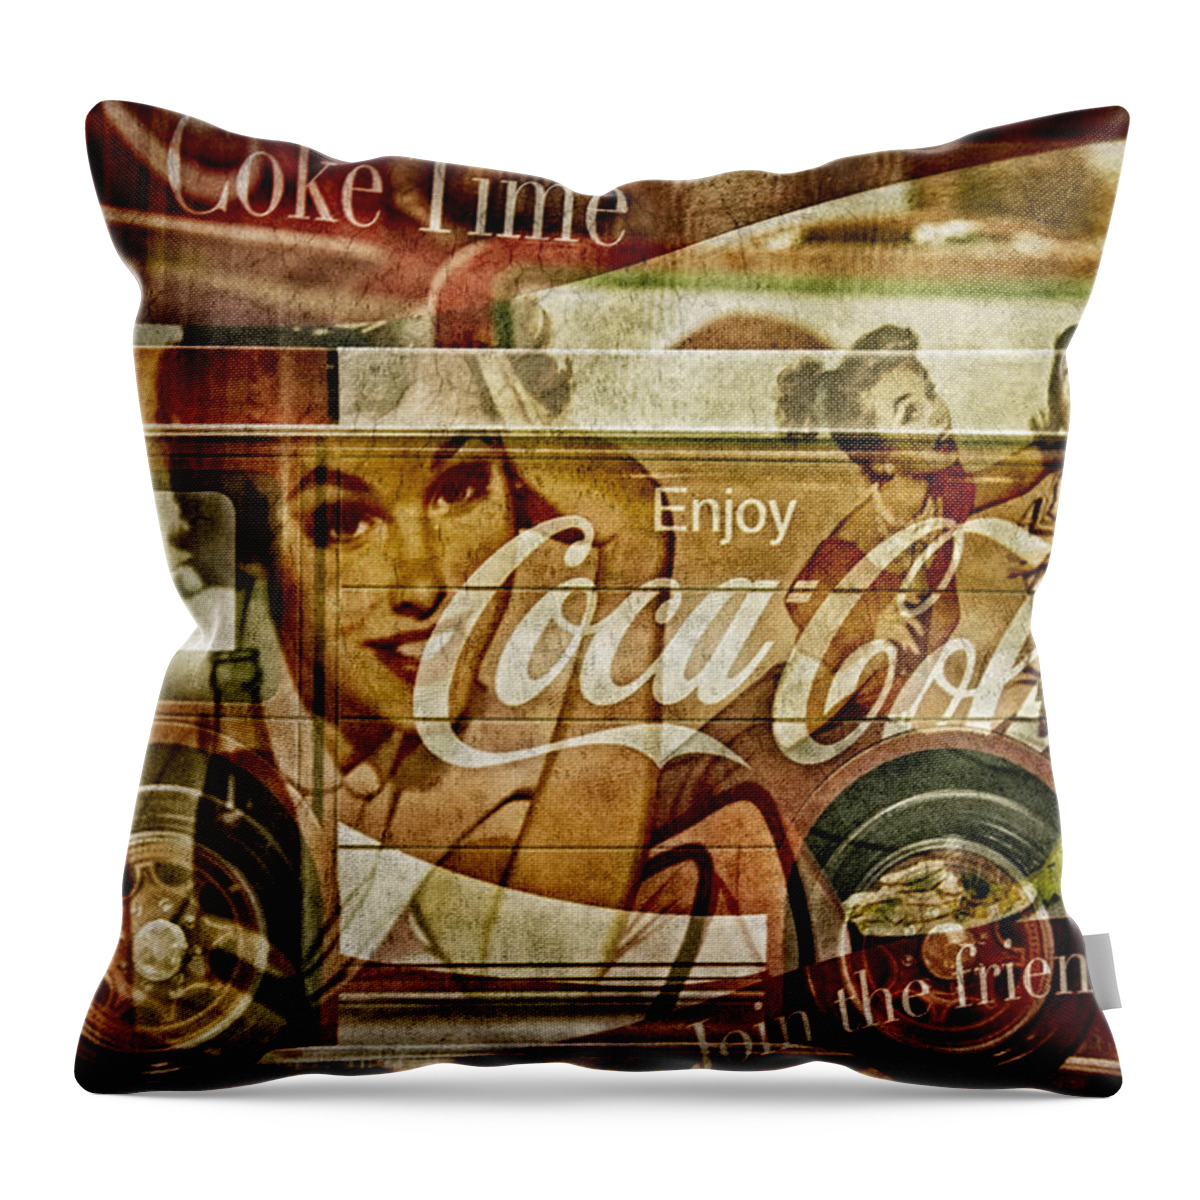 Coca Cola Throw Pillow featuring the photograph The Real Thing by Susan Candelario